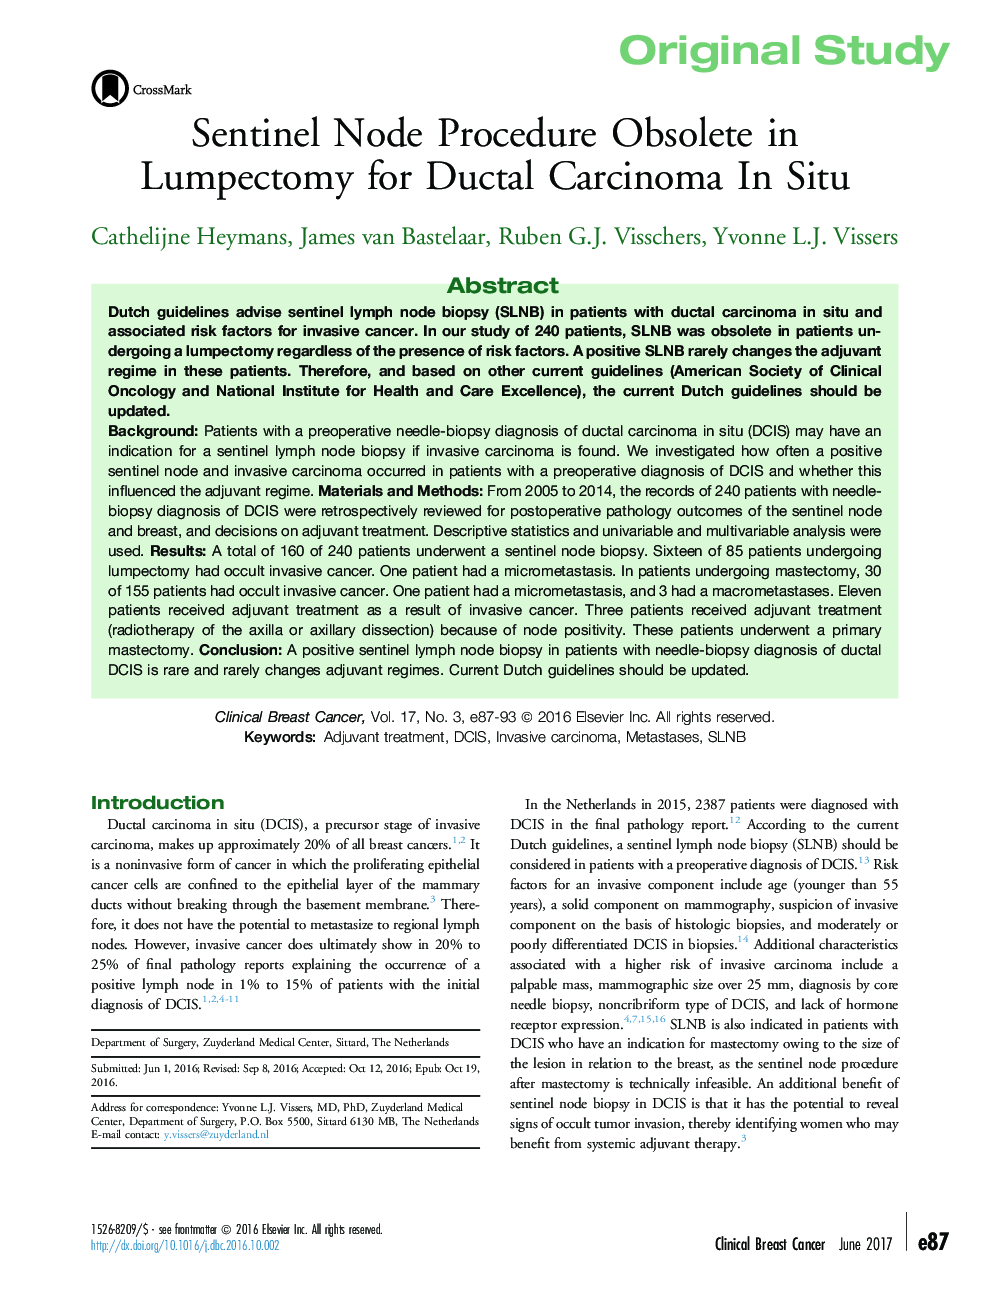 Sentinel Node Procedure Obsolete in Lumpectomy for Ductal Carcinoma In Situ